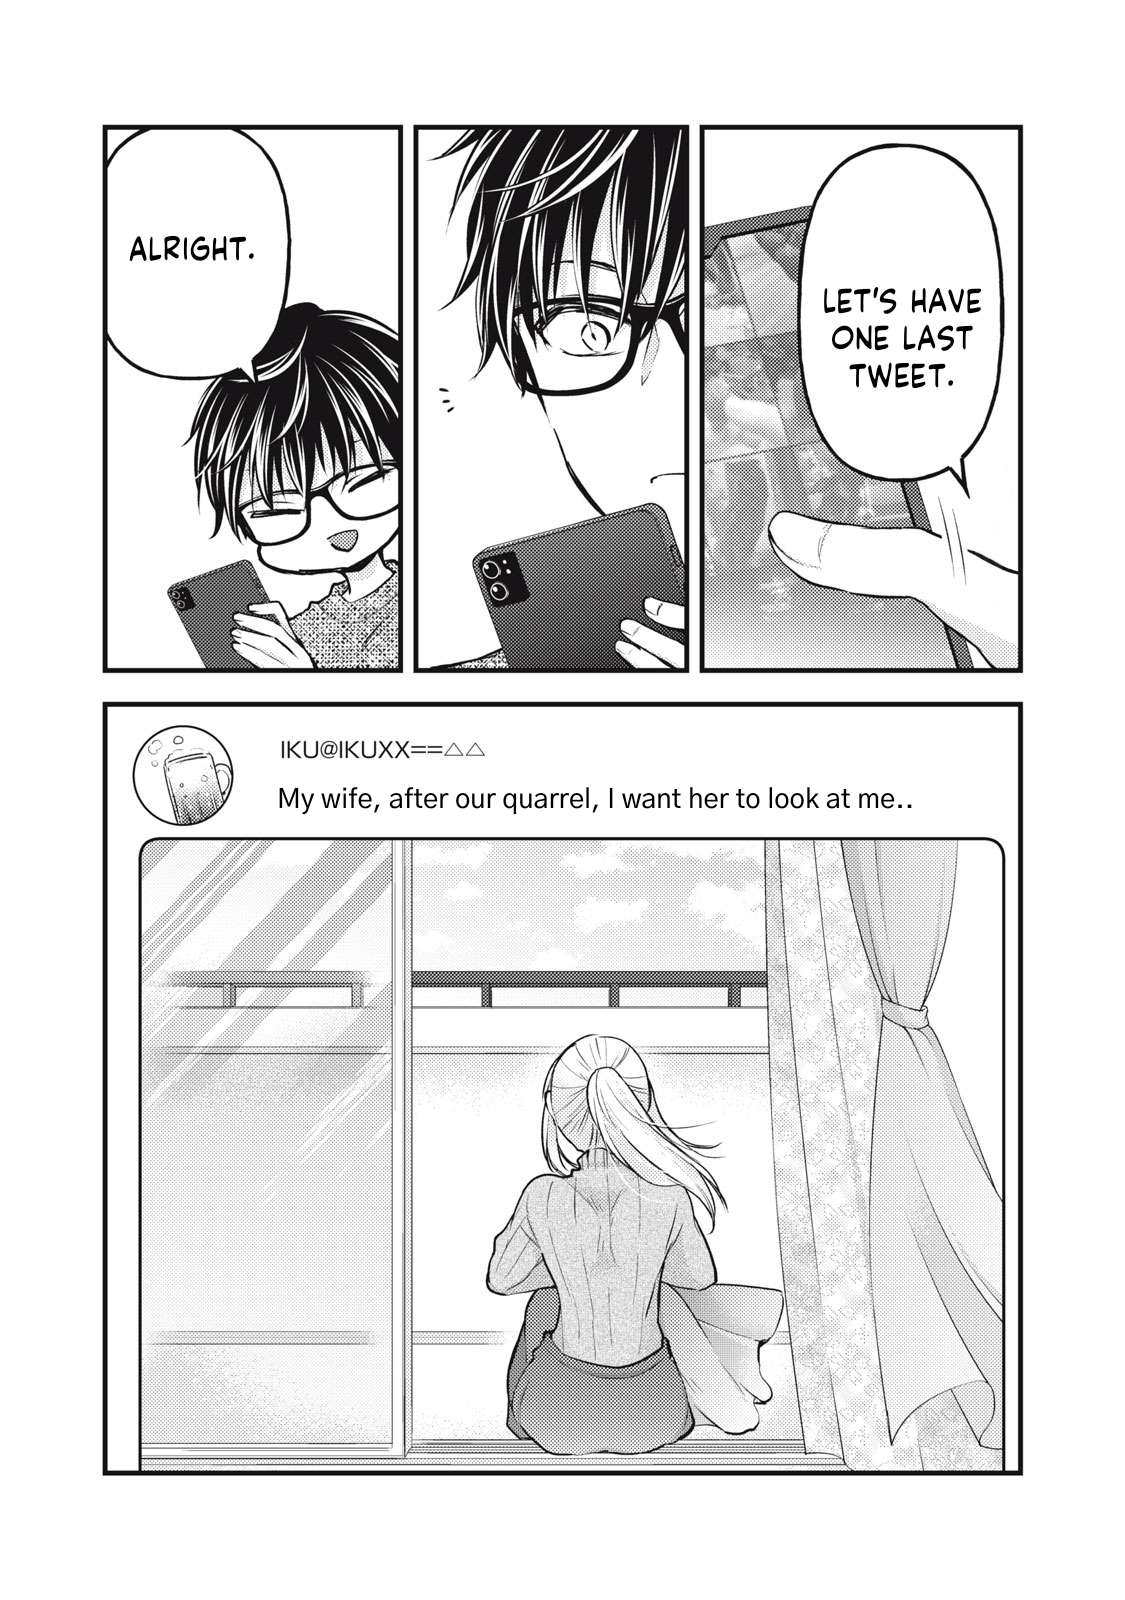 We May Be an Inexperienced Couple but... chapter 124 page 3